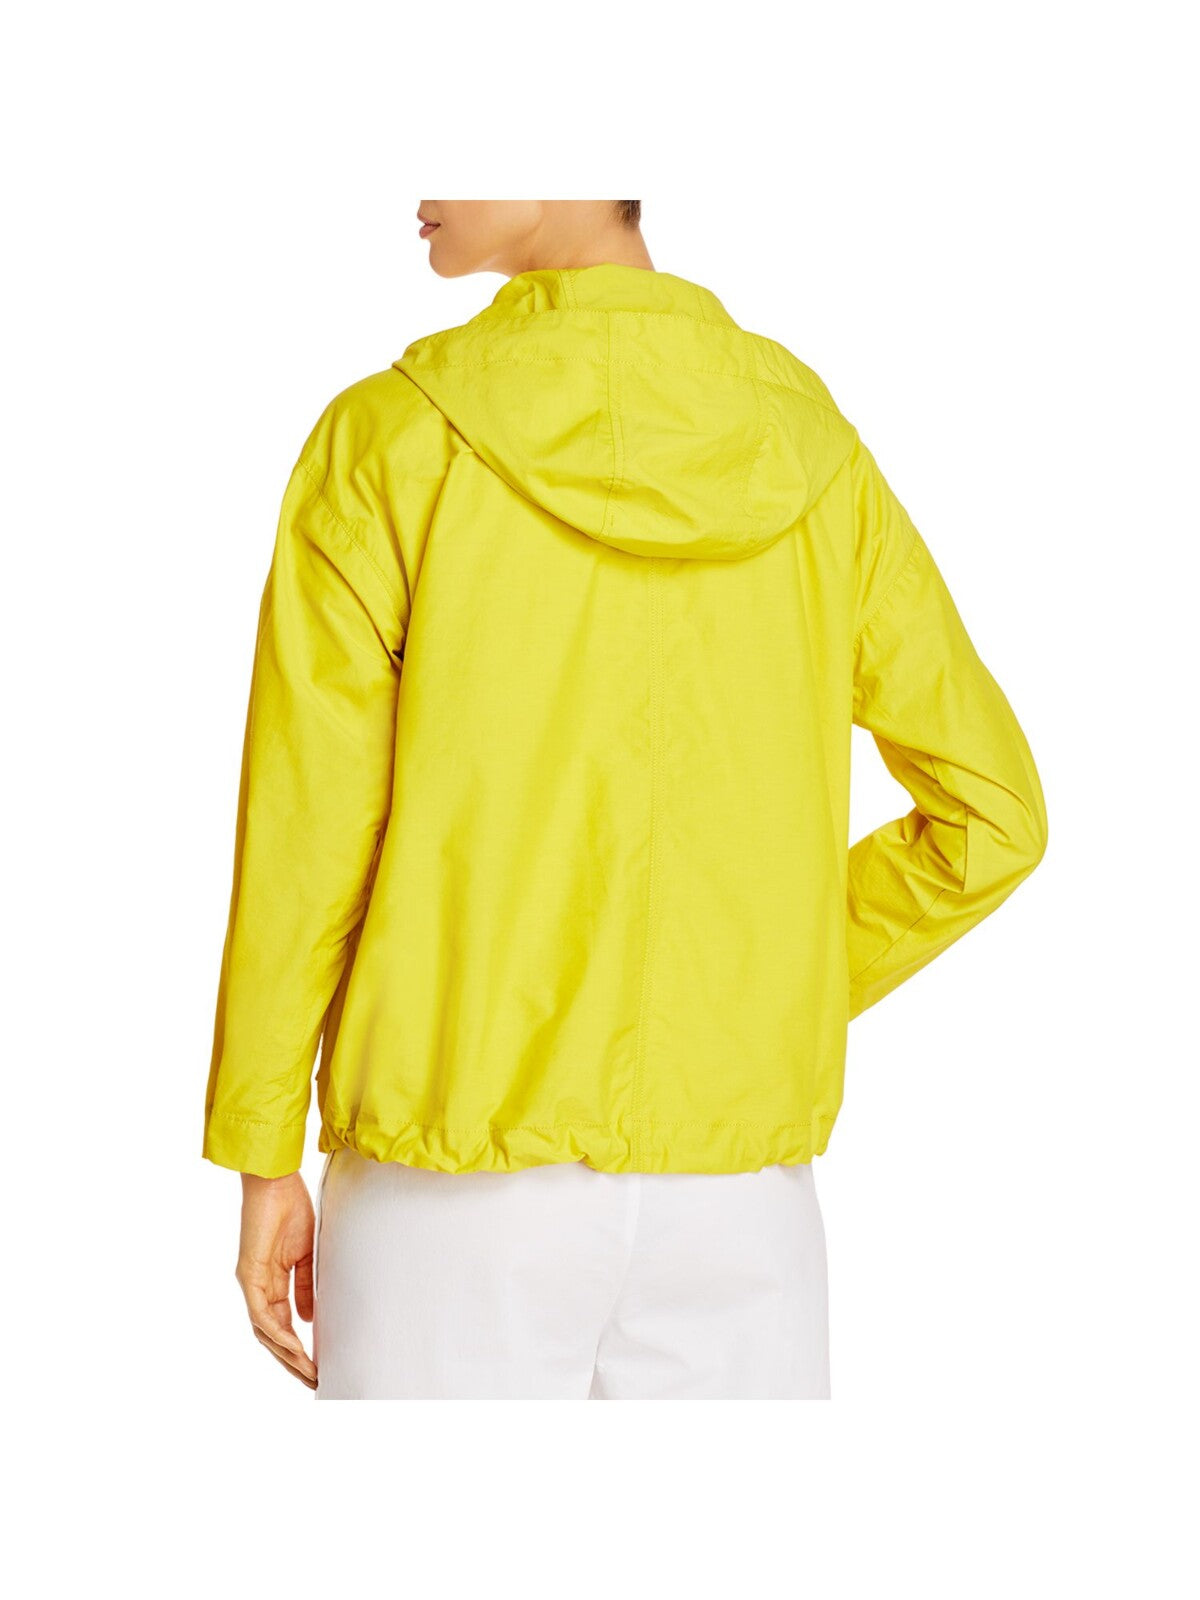 EILEEN FISHER Womens Yellow Pocketed Hooded Drawstring Hem Zip Up Jacket S